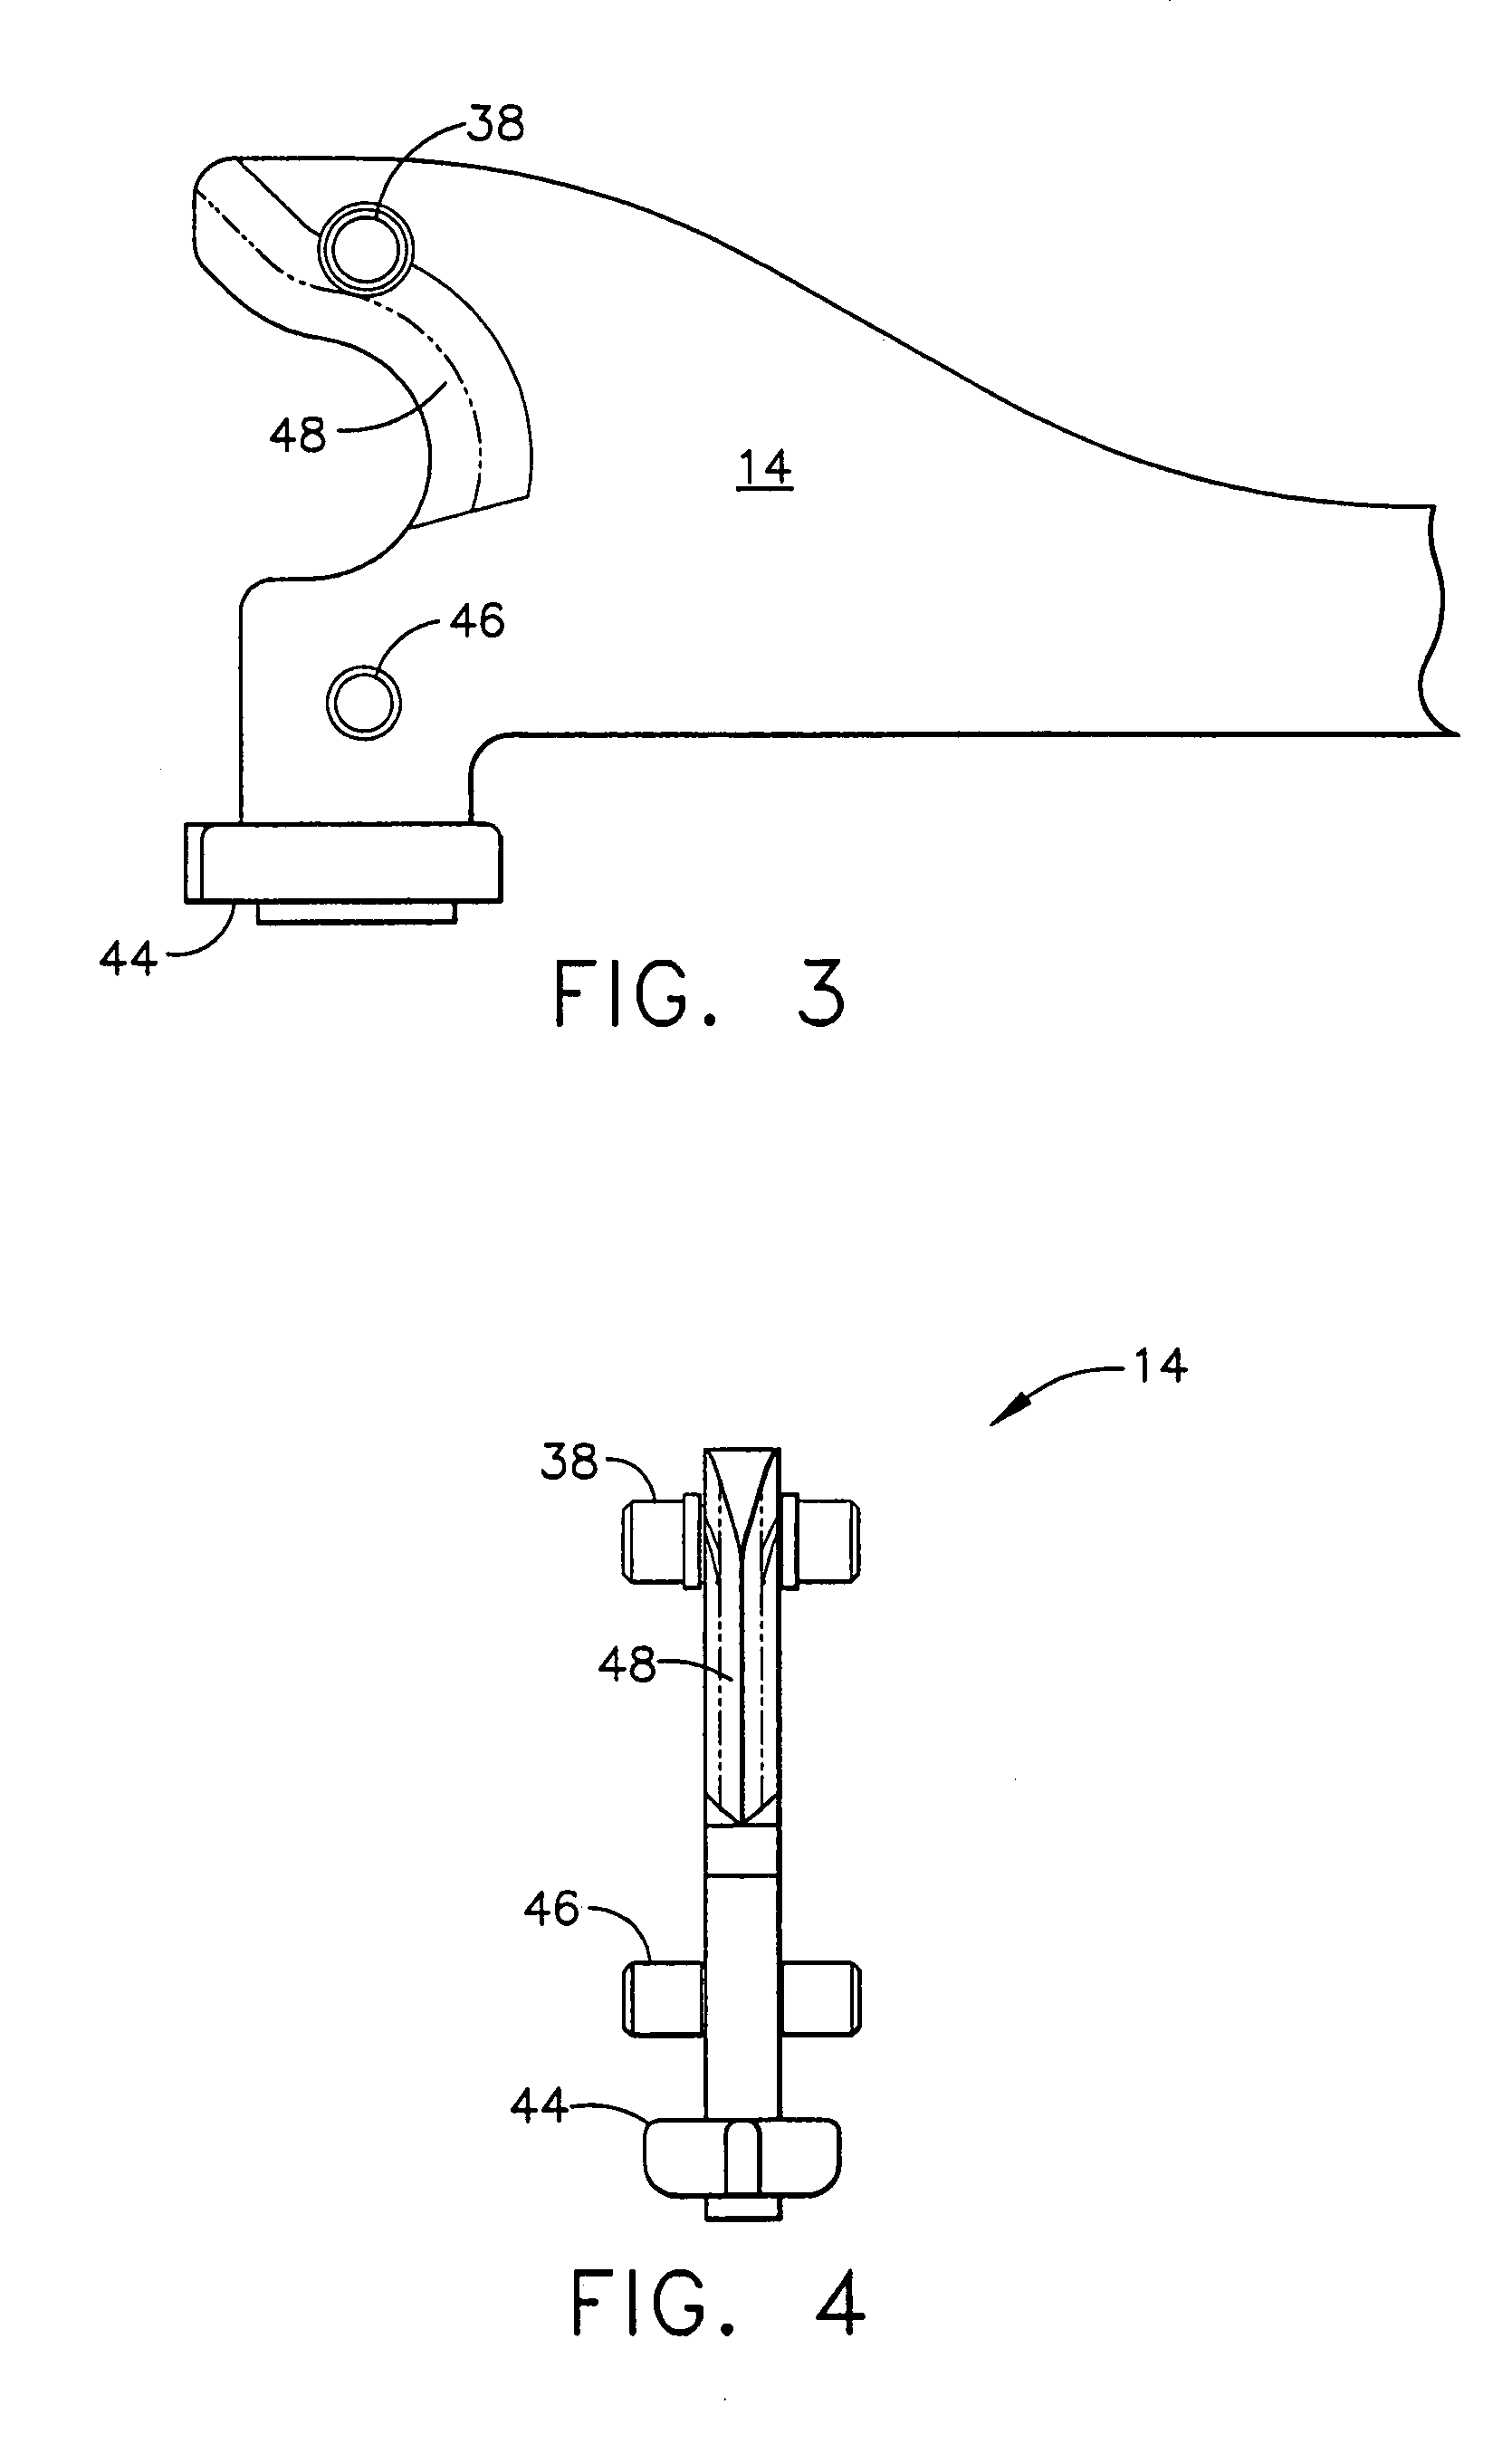 Surgical stapling instrument having an electroactive polymer actuated single lockout mechanism for prevention of firing